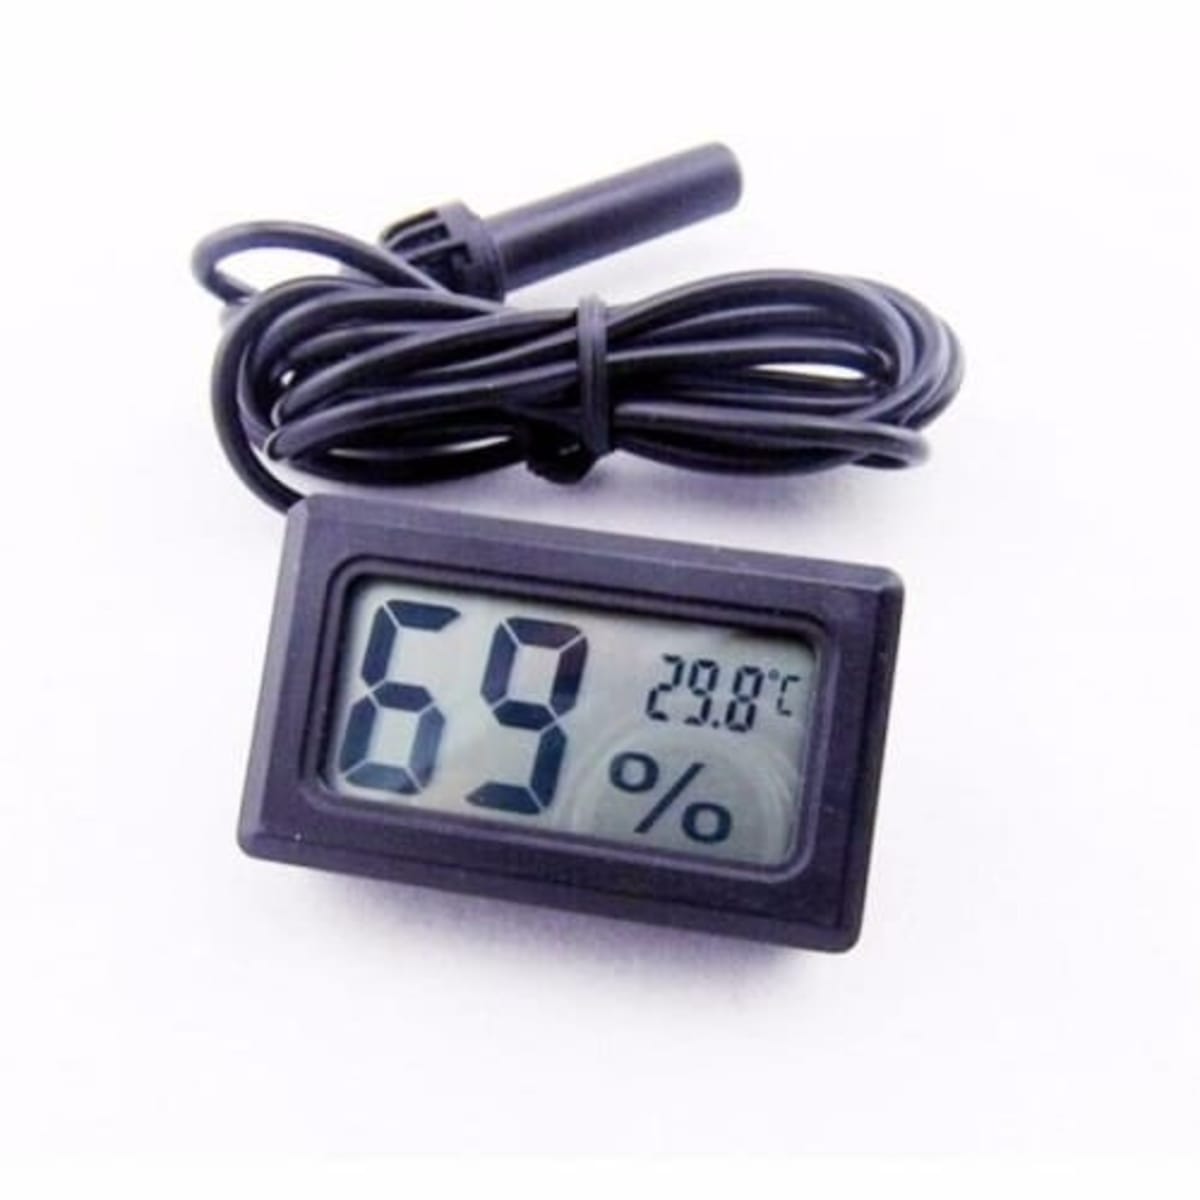 Egg Incubator Thermometer, Digital LCD Thermometer Hygrometer Temp Humidity  Monitor Meter for Egg Incubator Pet Keeping